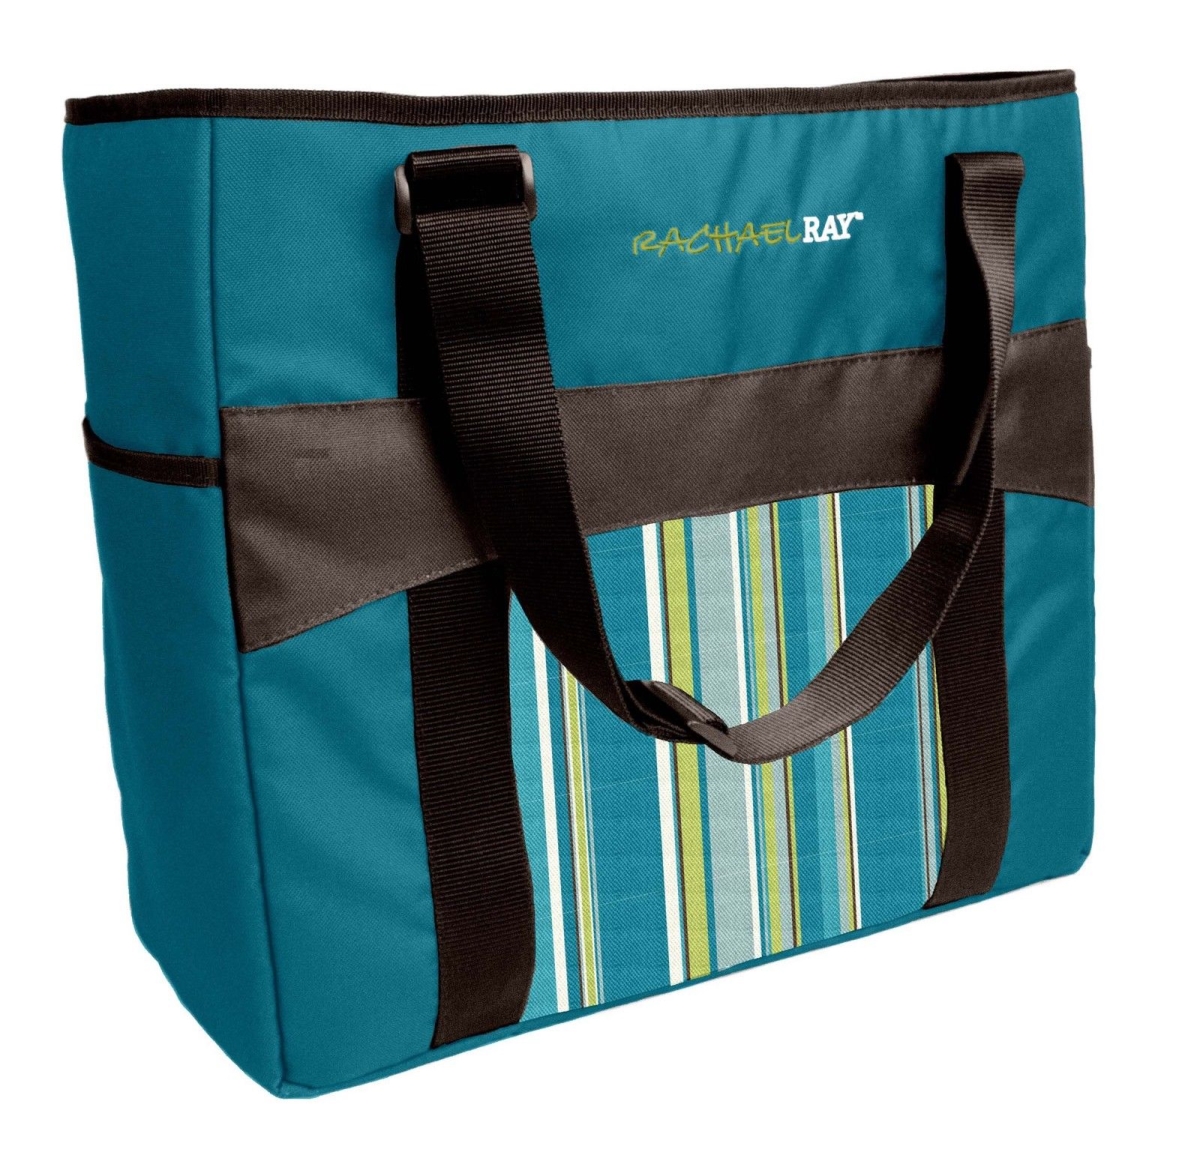 5070rr1638c Rachael Ray Chill Out 2 Go Deluxe Thermal Tote, Blue